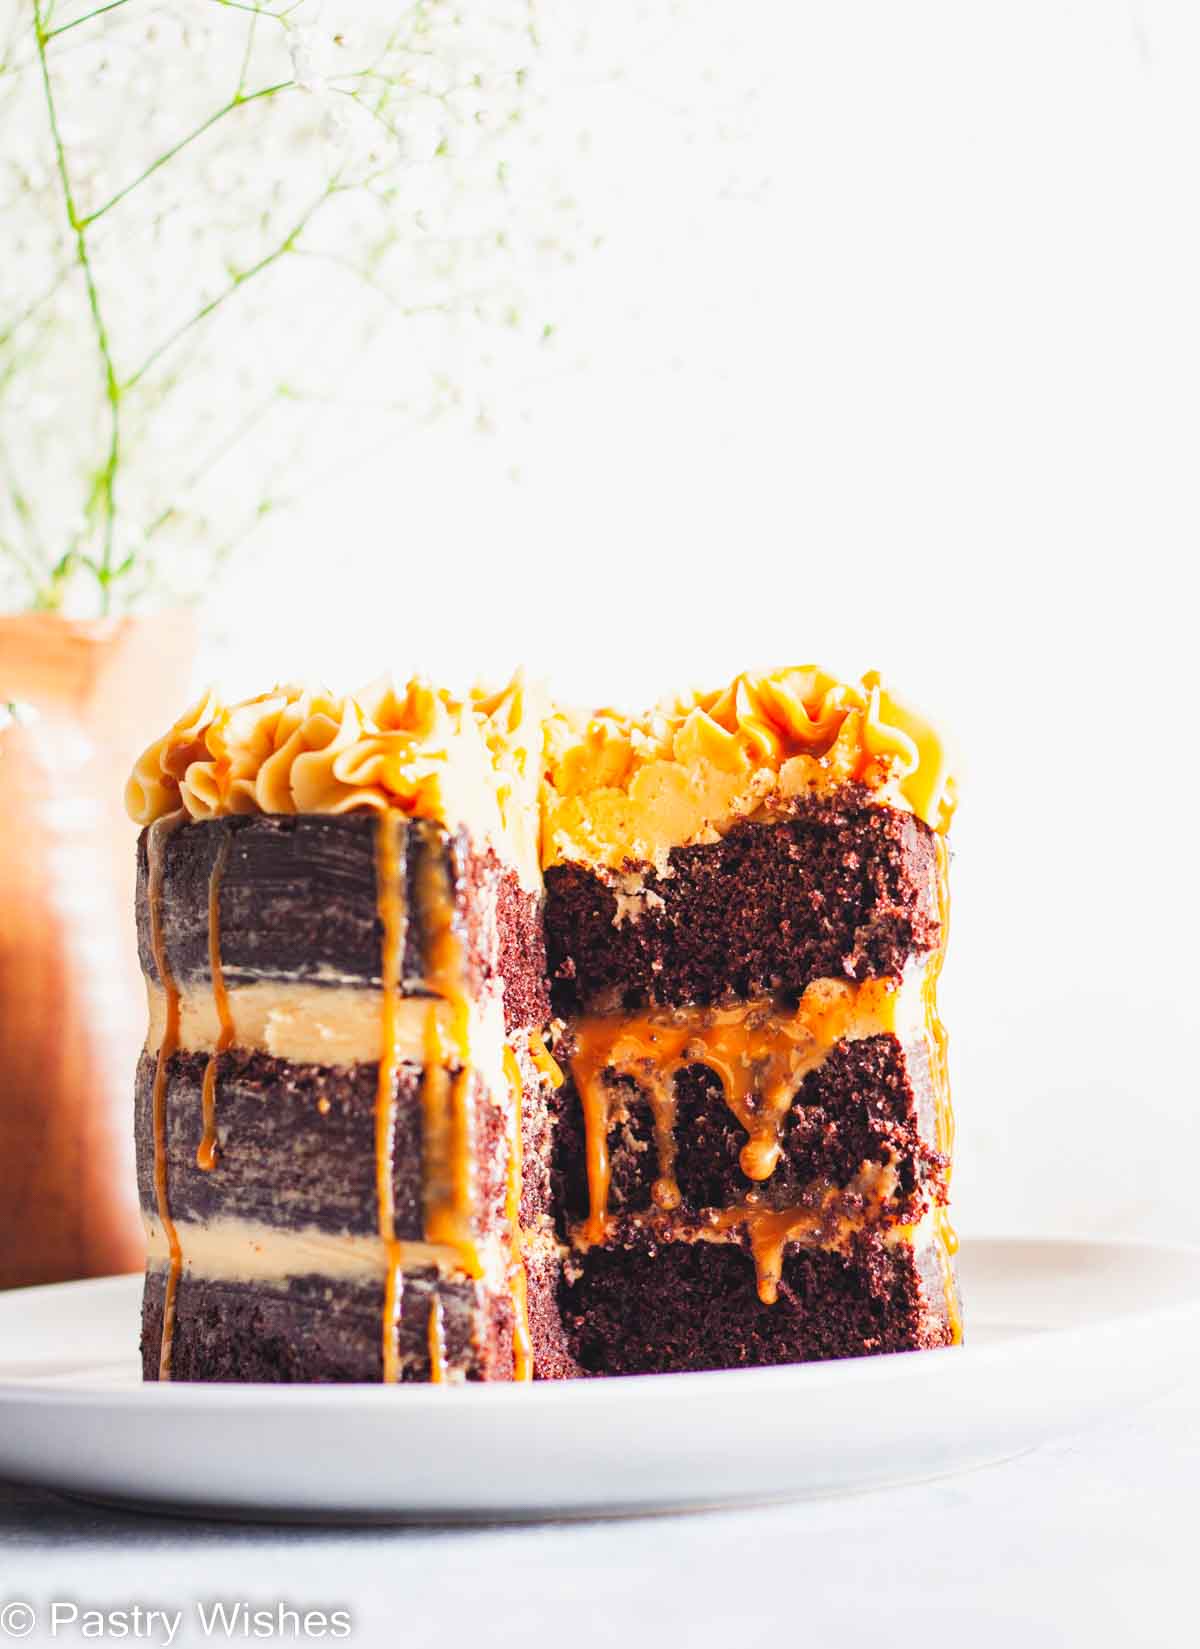 A closeup of a three layer chocolate salted caramel cake with caramel dripping in between the layers.